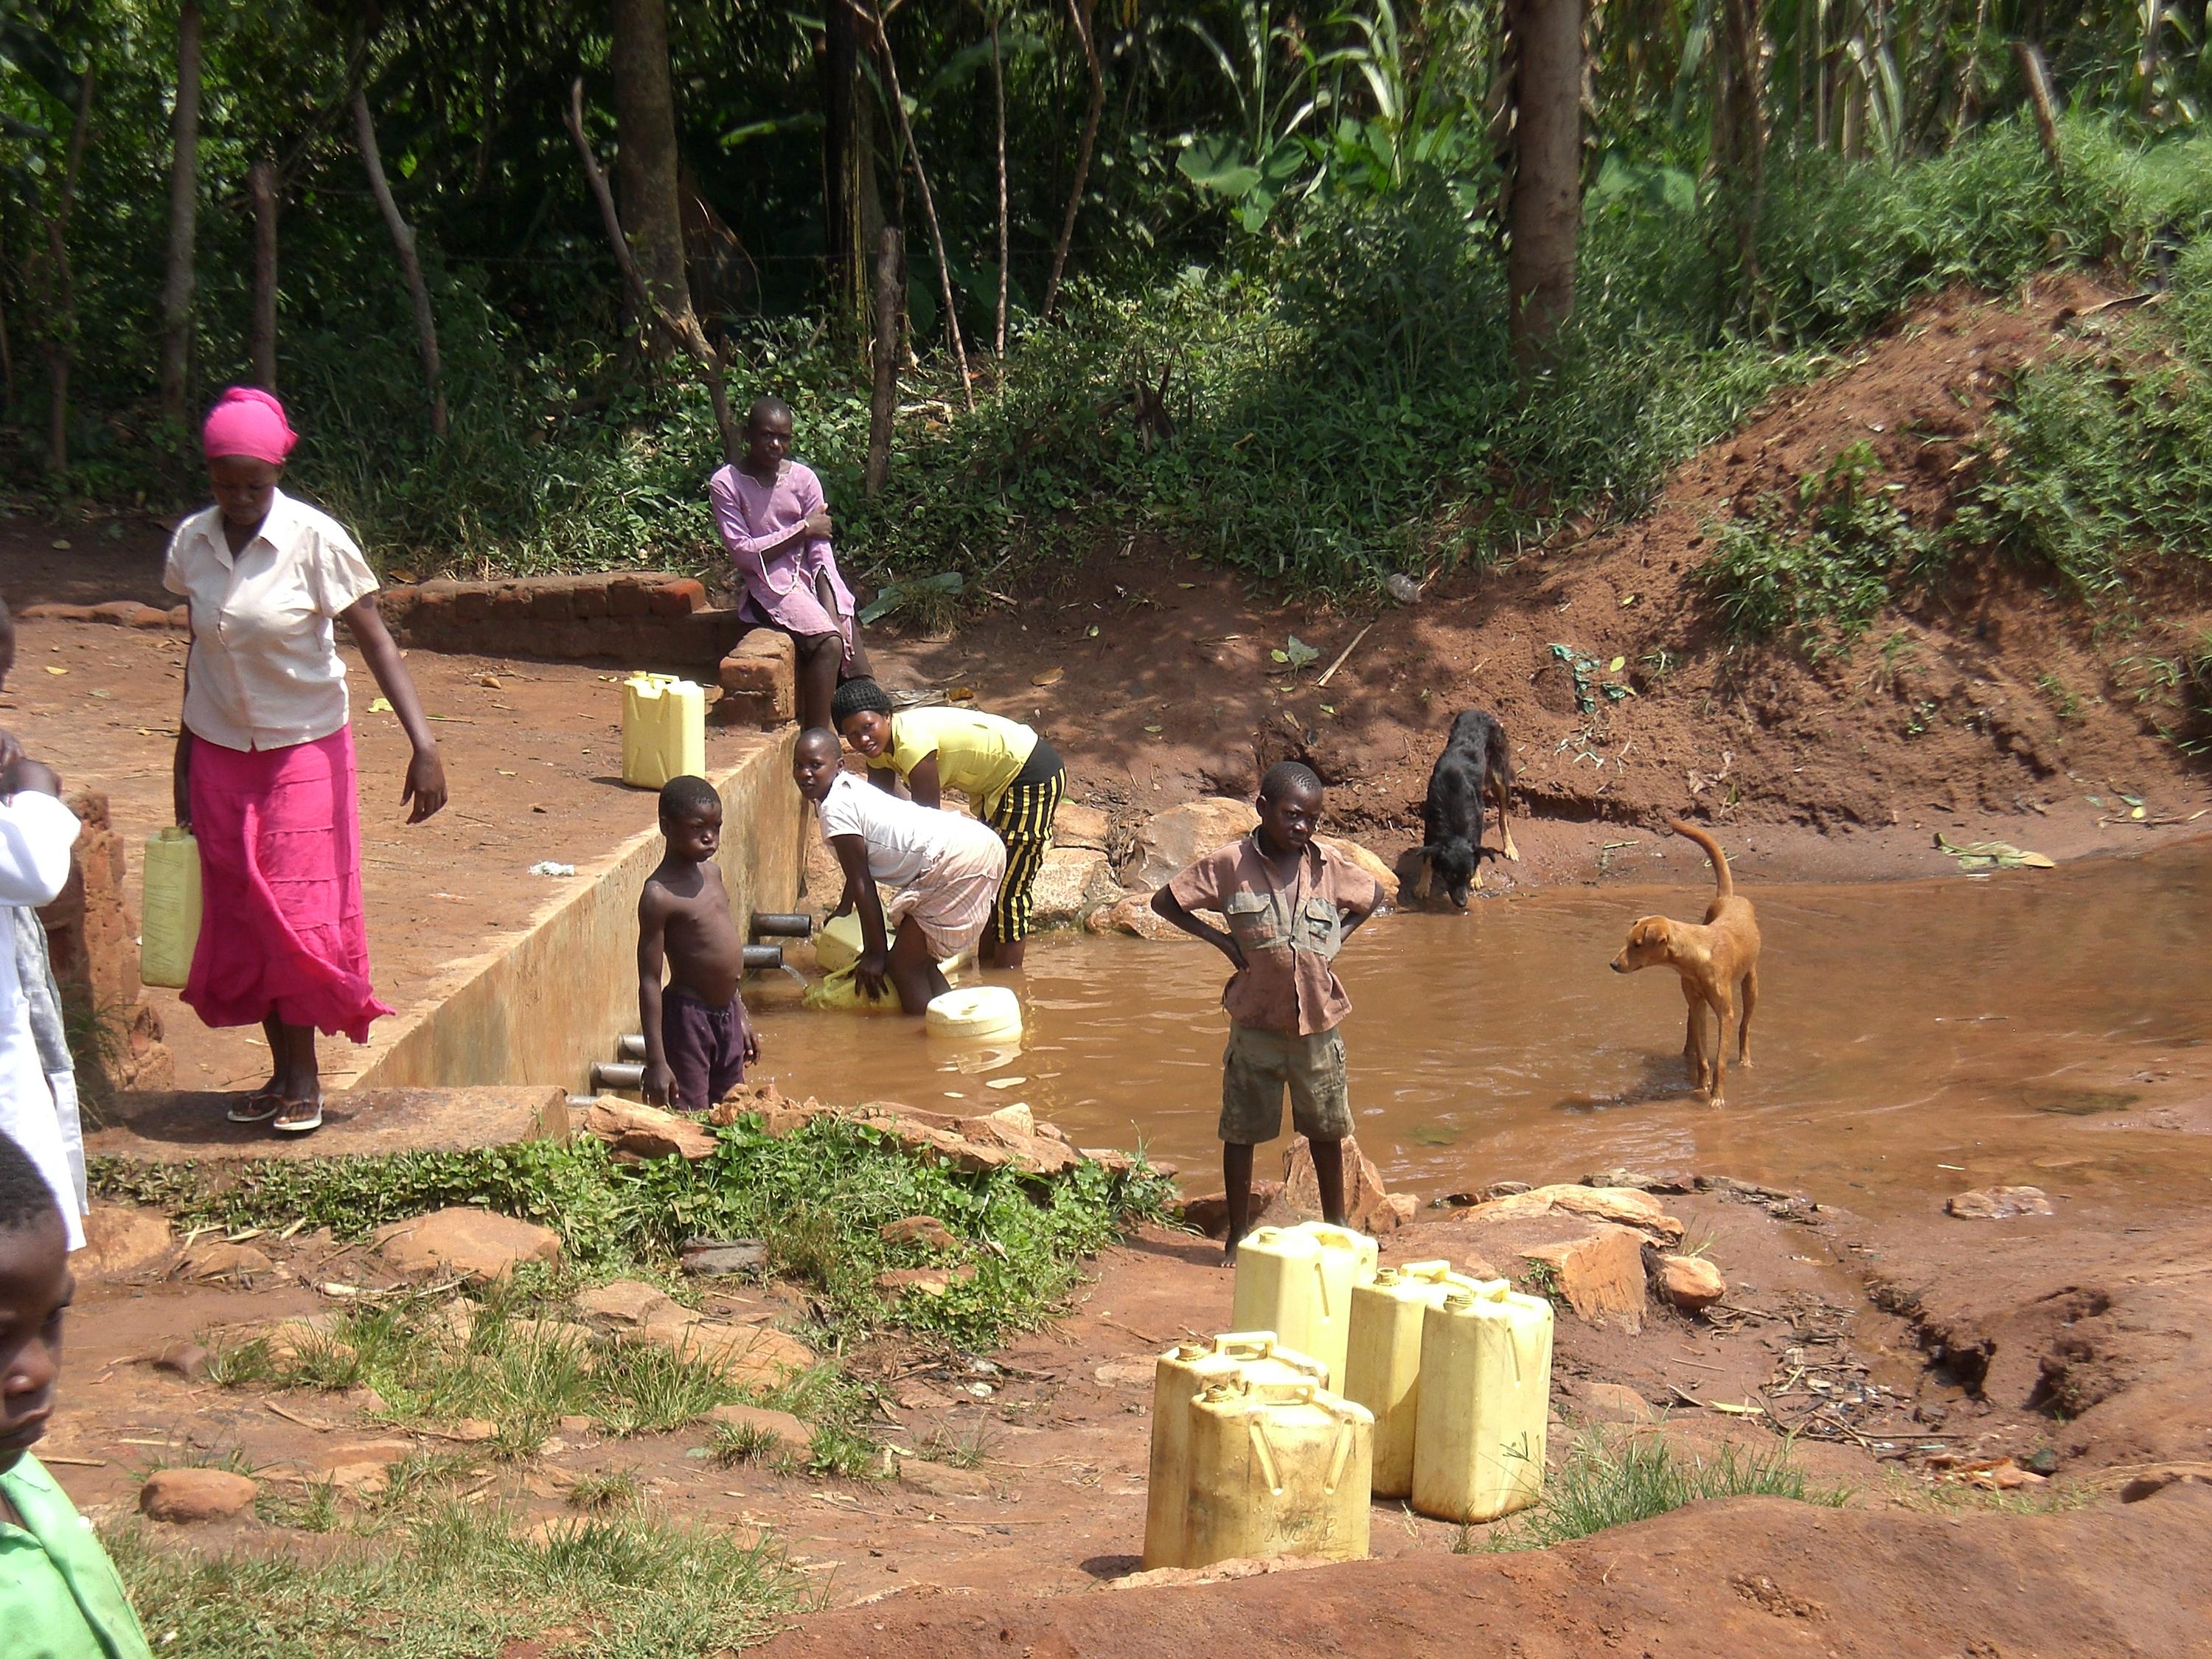 women and children collecting water in Africa